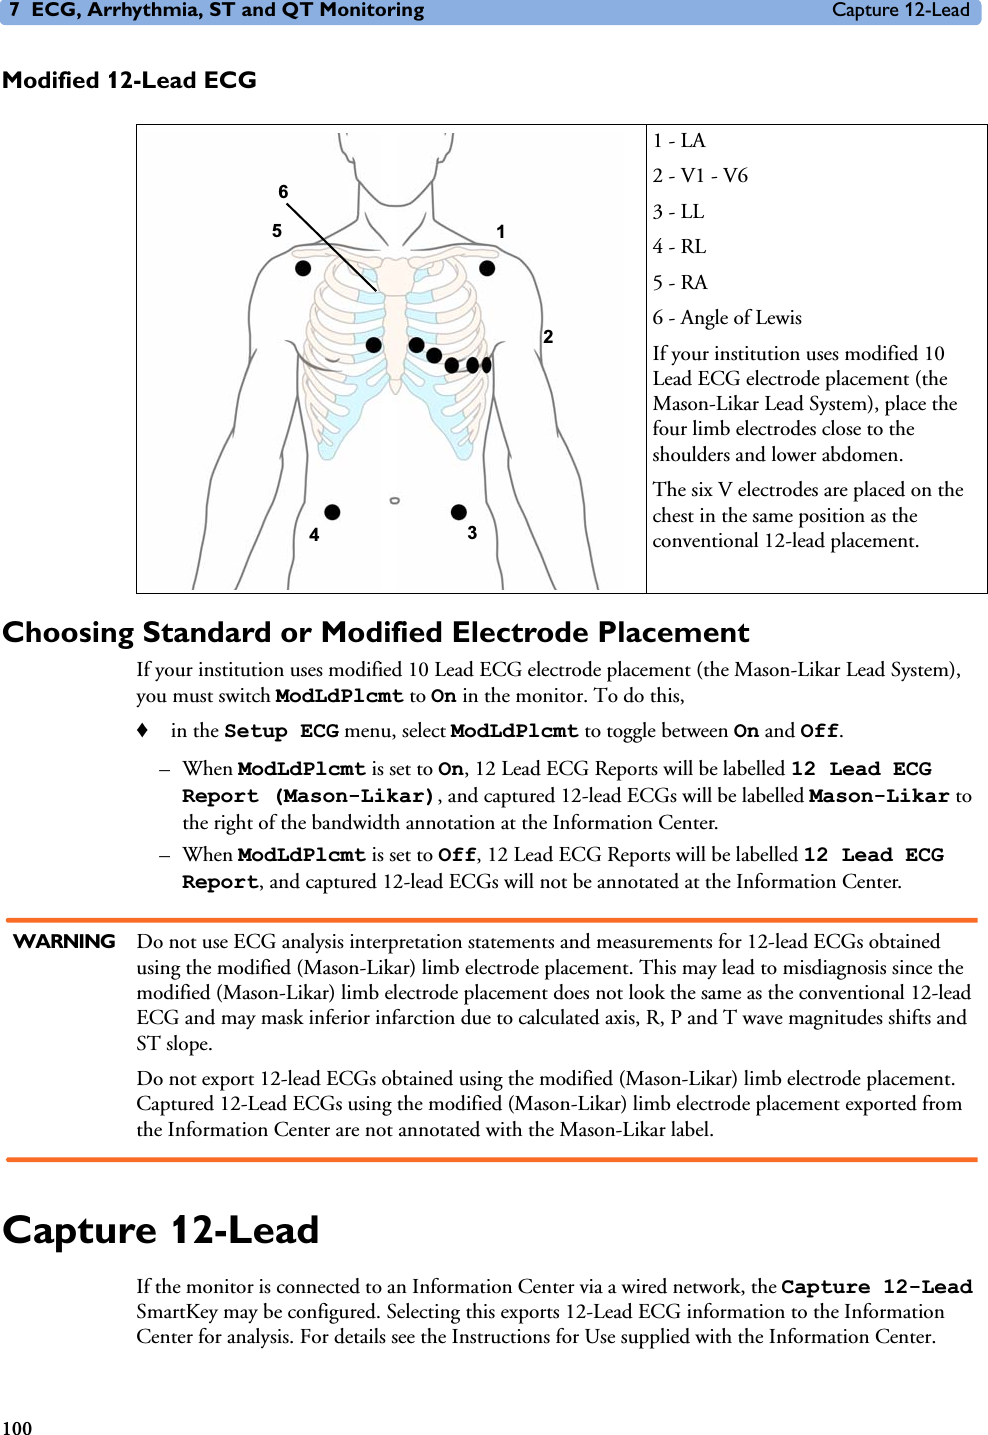 7 ECG, Arrhythmia, ST and QT Monitoring Capture 12-Lead100Modified 12-Lead ECGChoosing Standard or Modified Electrode PlacementIf your institution uses modified 10 Lead ECG electrode placement (the Mason-Likar Lead System), you must switch ModLdPlcmt to On in the monitor. To do this,♦in the Setup ECG menu, select ModLdPlcmt to toggle between On and Off.–When ModLdPlcmt is set to On, 12 Lead ECG Reports will be labelled 12 Lead ECG Report (Mason-Likar), and captured 12-lead ECGs will be labelled Mason-Likar to the right of the bandwidth annotation at the Information Center.–When ModLdPlcmt is set to Off, 12 Lead ECG Reports will be labelled 12 Lead ECG Report, and captured 12-lead ECGs will not be annotated at the Information Center.WARNING Do not use ECG analysis interpretation statements and measurements for 12-lead ECGs obtained using the modified (Mason-Likar) limb electrode placement. This may lead to misdiagnosis since the modified (Mason-Likar) limb electrode placement does not look the same as the conventional 12-lead ECG and may mask inferior infarction due to calculated axis, R, P and T wave magnitudes shifts and ST slope. Do not export 12-lead ECGs obtained using the modified (Mason-Likar) limb electrode placement. Captured 12-Lead ECGs using the modified (Mason-Likar) limb electrode placement exported from the Information Center are not annotated with the Mason-Likar label. Capture 12-LeadIf the monitor is connected to an Information Center via a wired network, the Capture 12-Lead SmartKey may be configured. Selecting this exports 12-Lead ECG information to the Information Center for analysis. For details see the Instructions for Use supplied with the Information Center. 1 - LA2 - V1 - V63 - LL4 - RL5 - RA6 - Angle of LewisIf your institution uses modified 10 Lead ECG electrode placement (the Mason-Likar Lead System), place the four limb electrodes close to the shoulders and lower abdomen.The six V electrodes are placed on the chest in the same position as the conventional 12-lead placement.1 35462